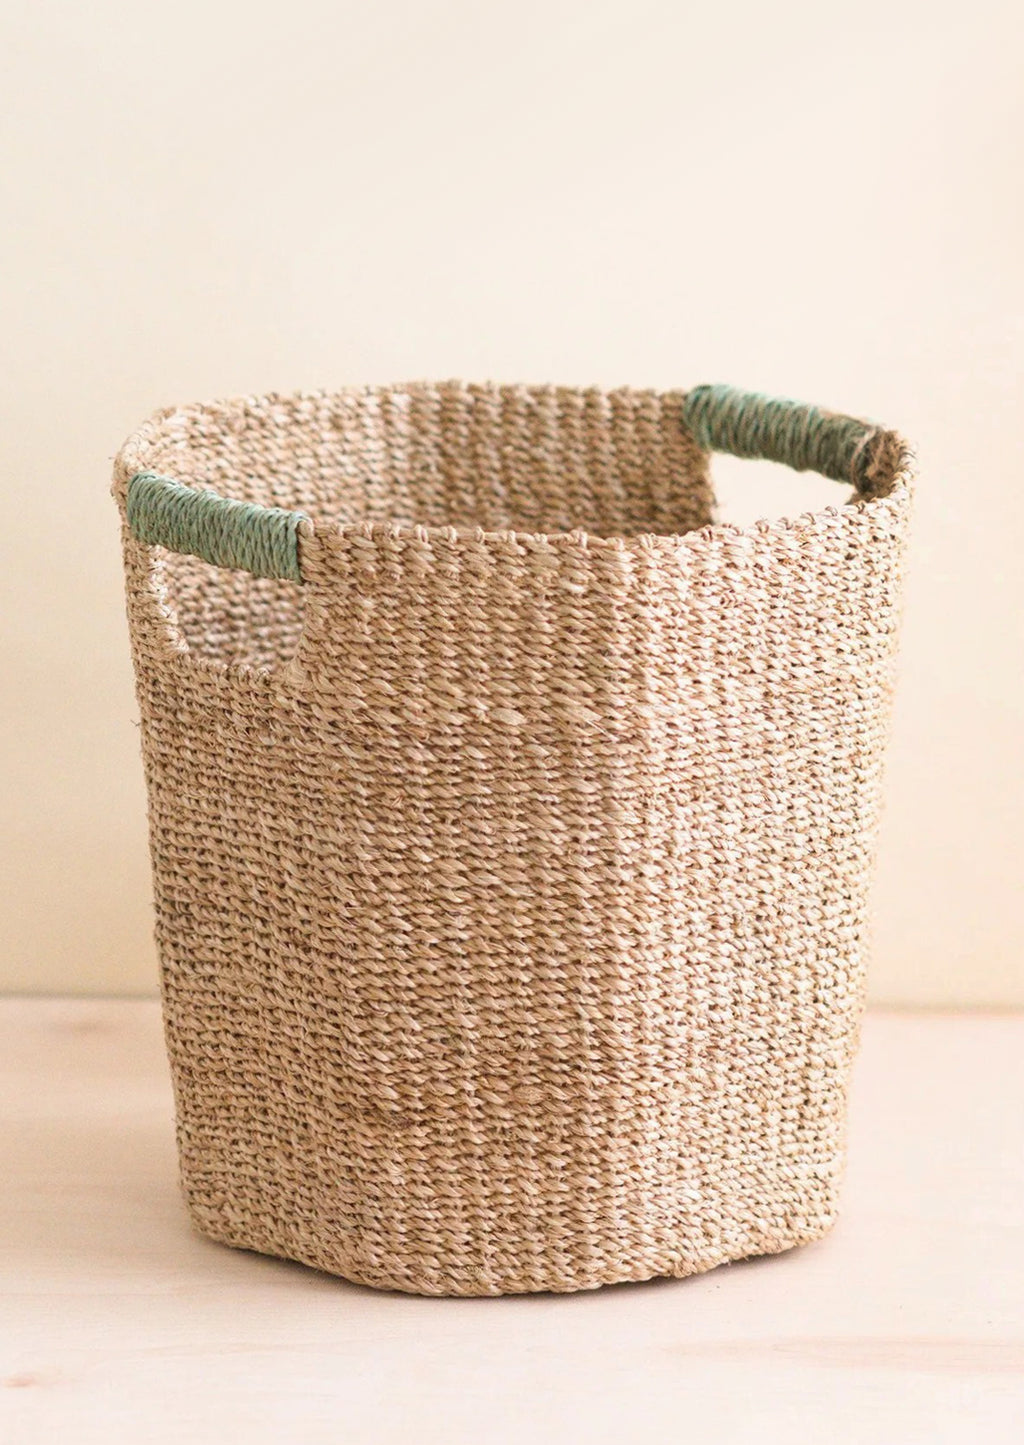 Seafoam: An octogonal natural basket wageith s wrapped cutout handle.